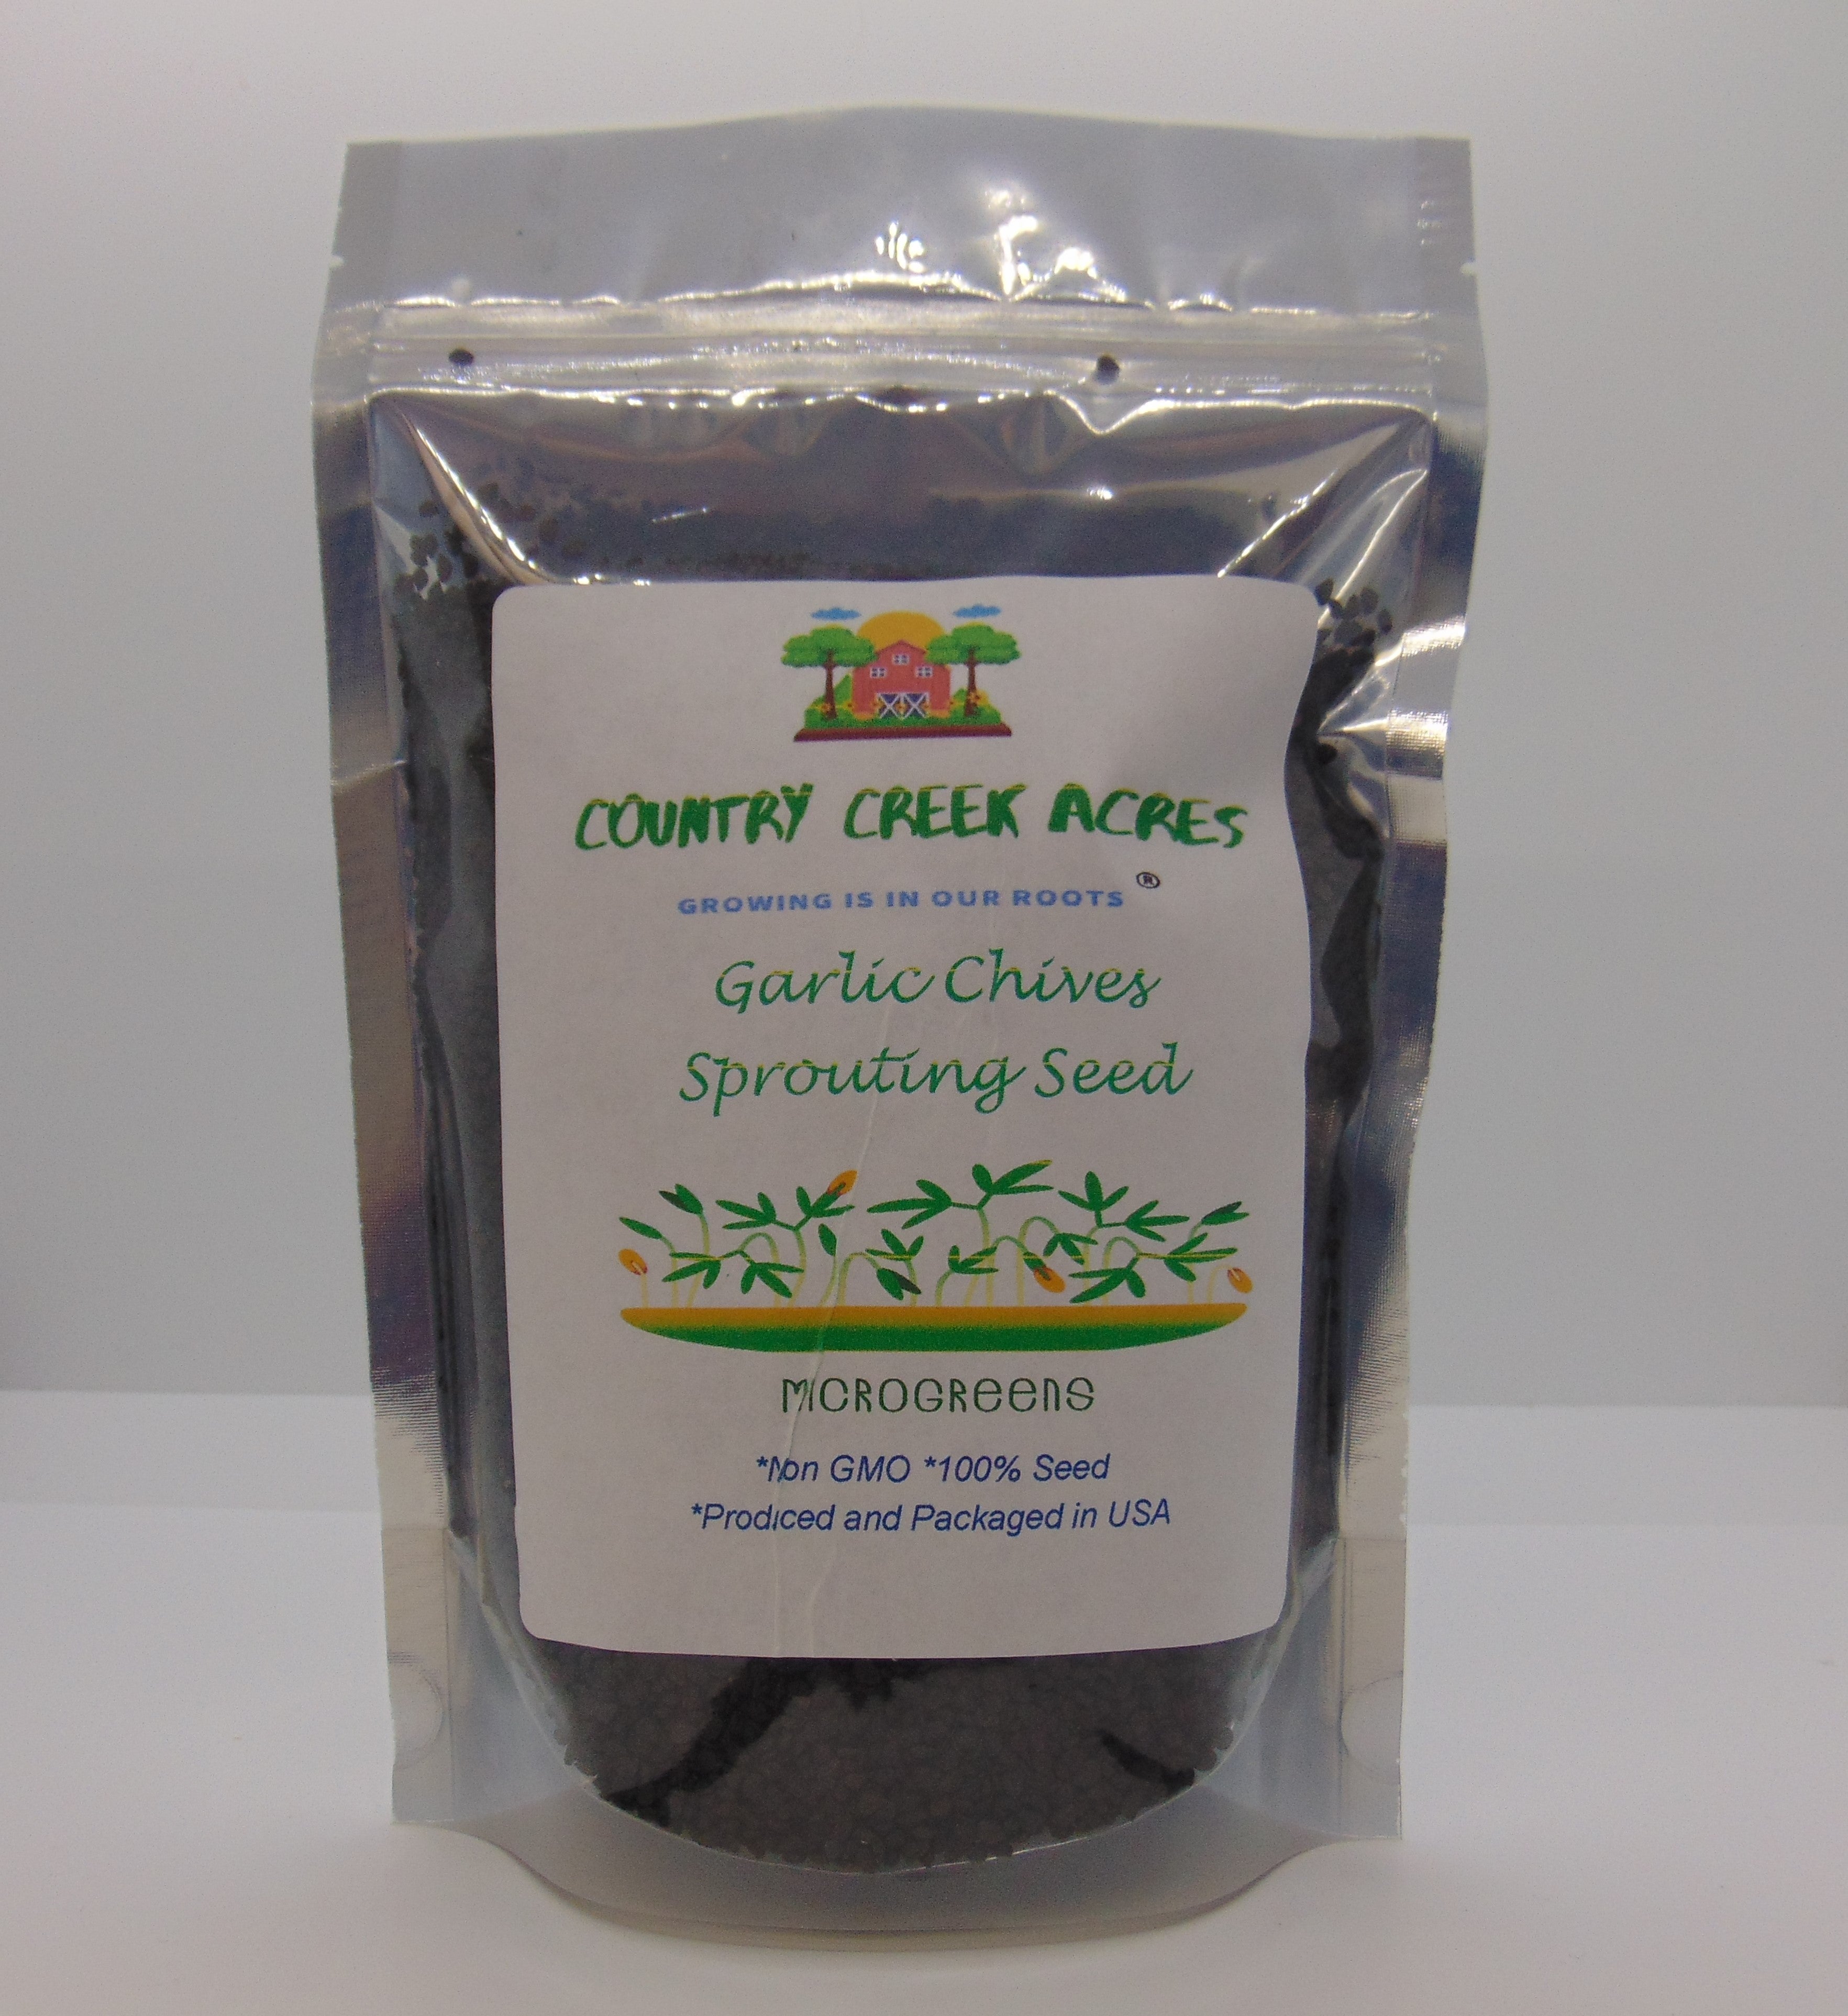 Garlic Chives Sprouting Seeds- Non-GMO Sprouting Seeds - Microgreens, Garden Planting, or planters Country Creek LLC. Brand.